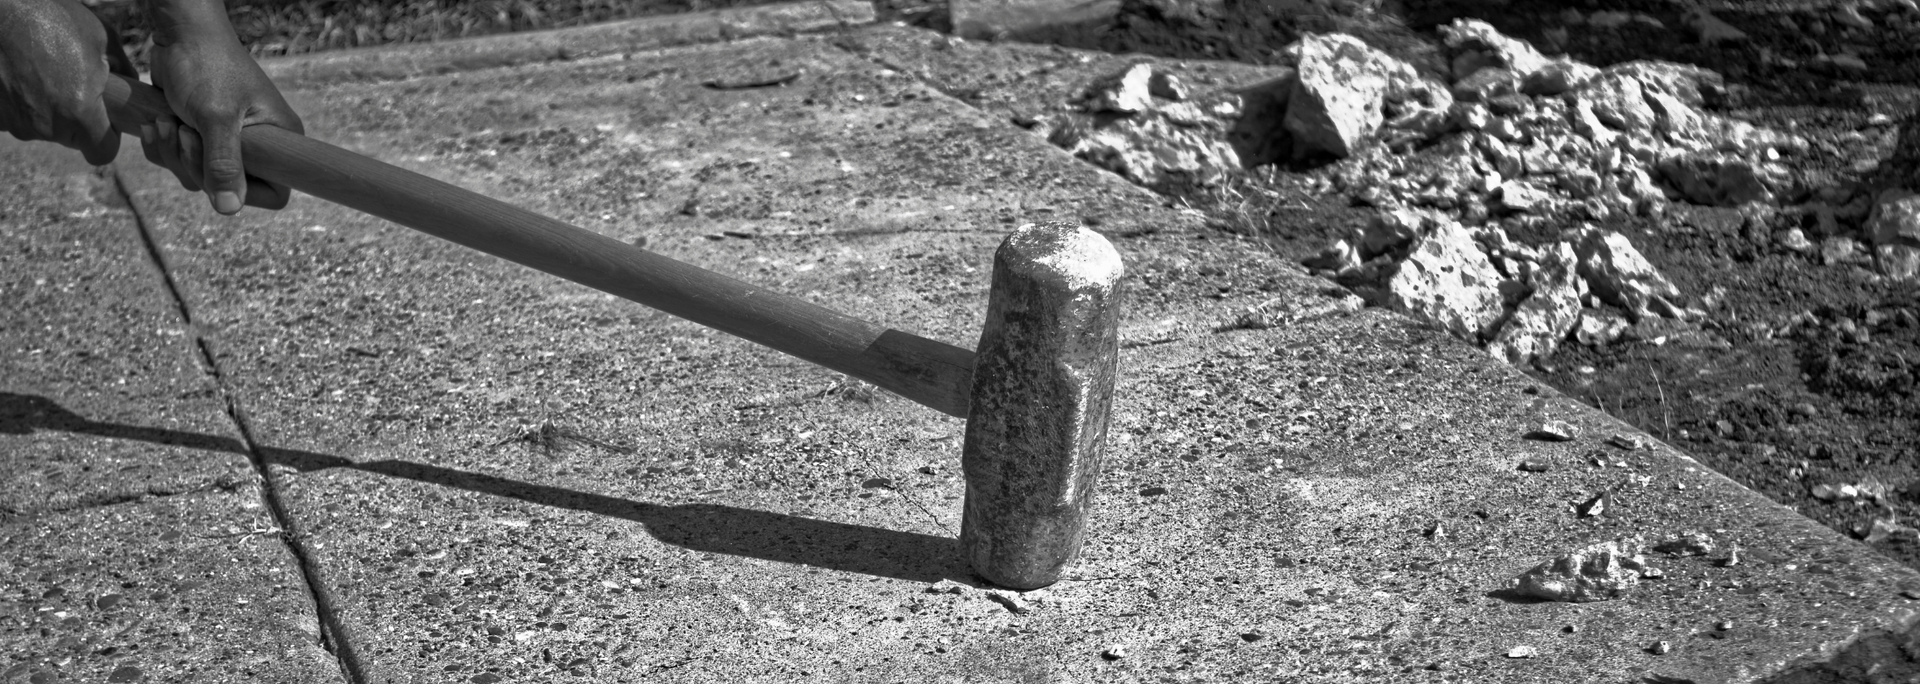 Picture of a nut being cracked by a sledgehammer